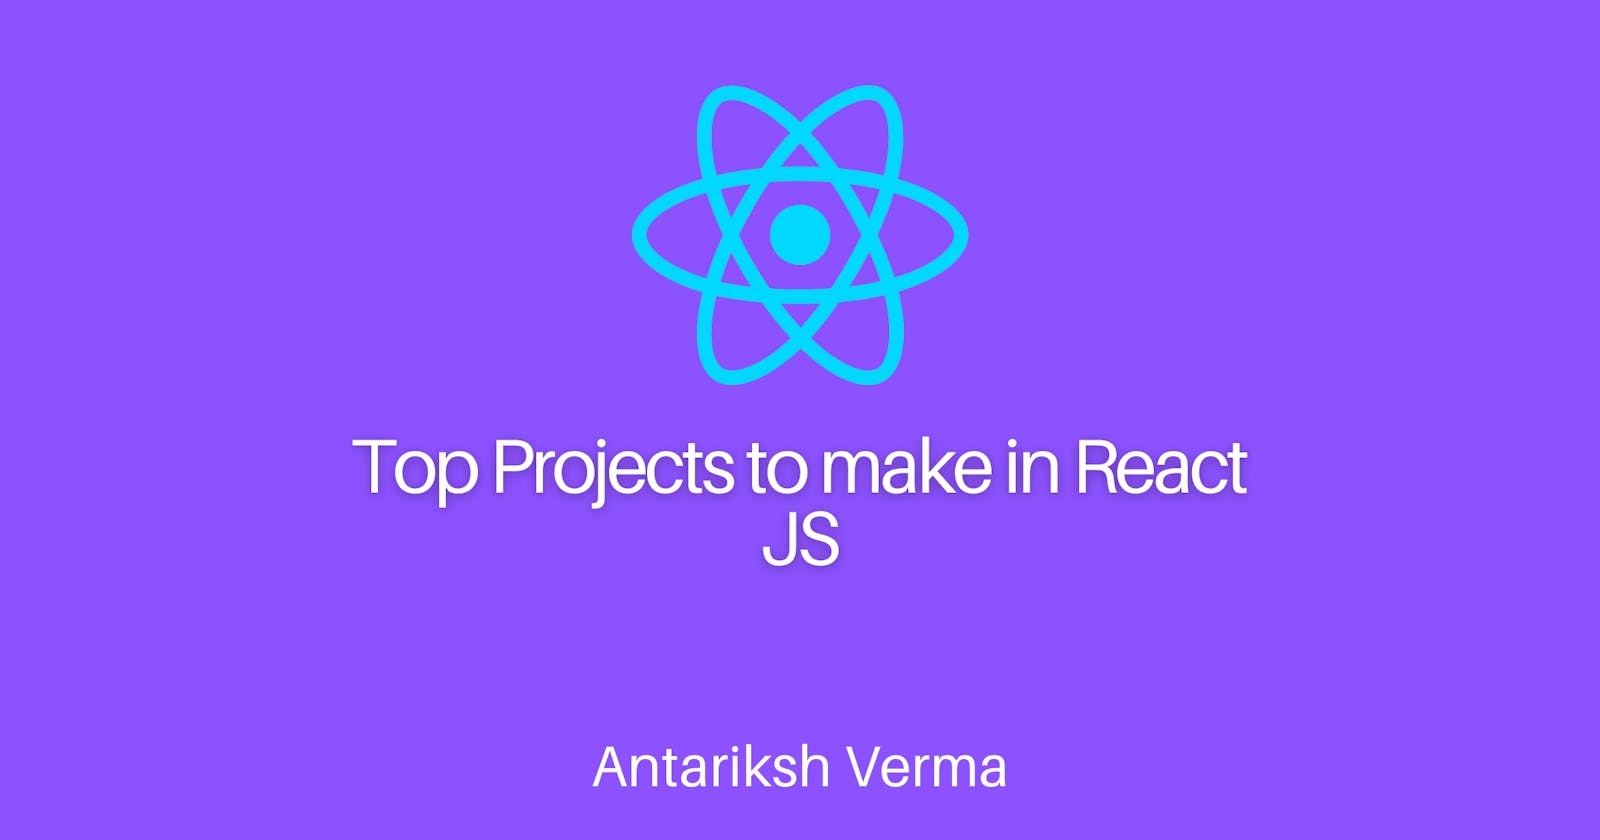 Top Projects to make in React JS